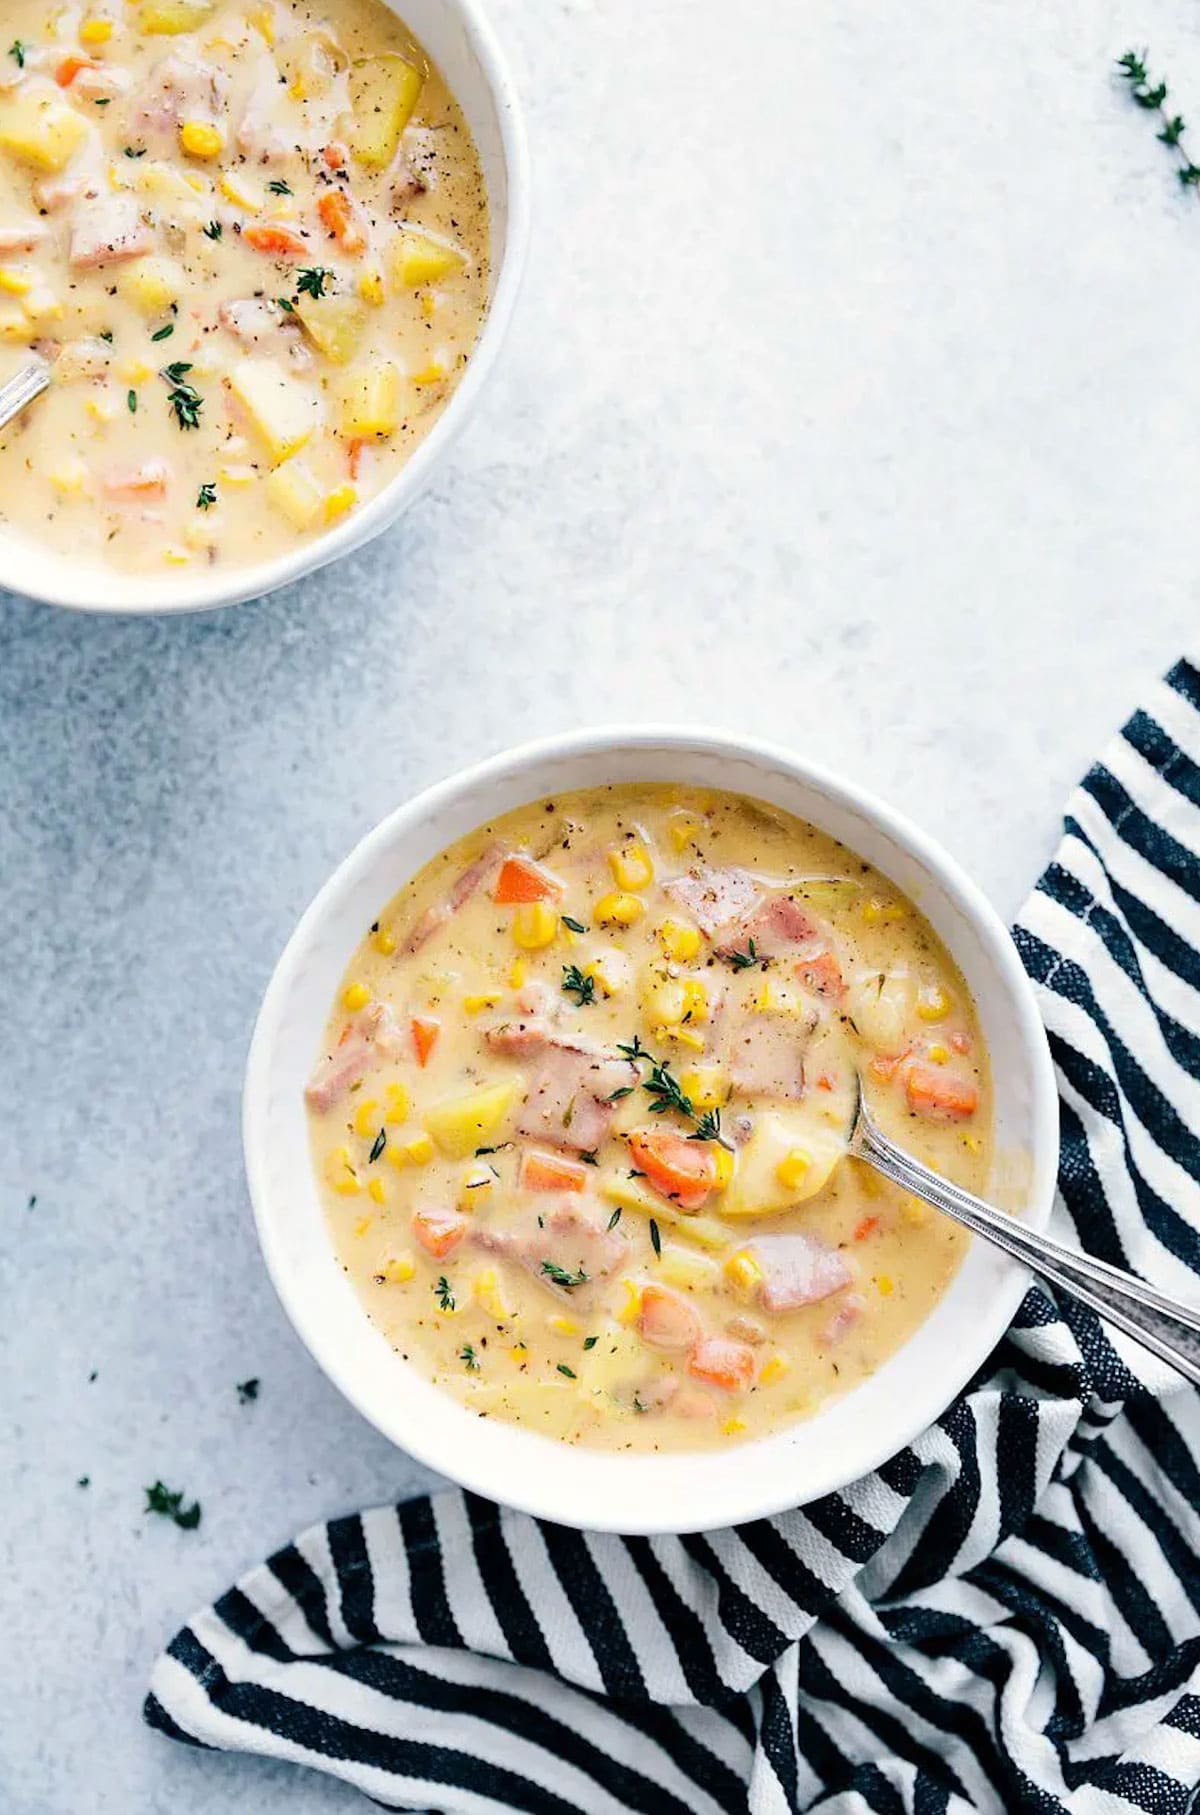 Bowls of ham and potato soup with vegetables topped with sprinkle of herbs